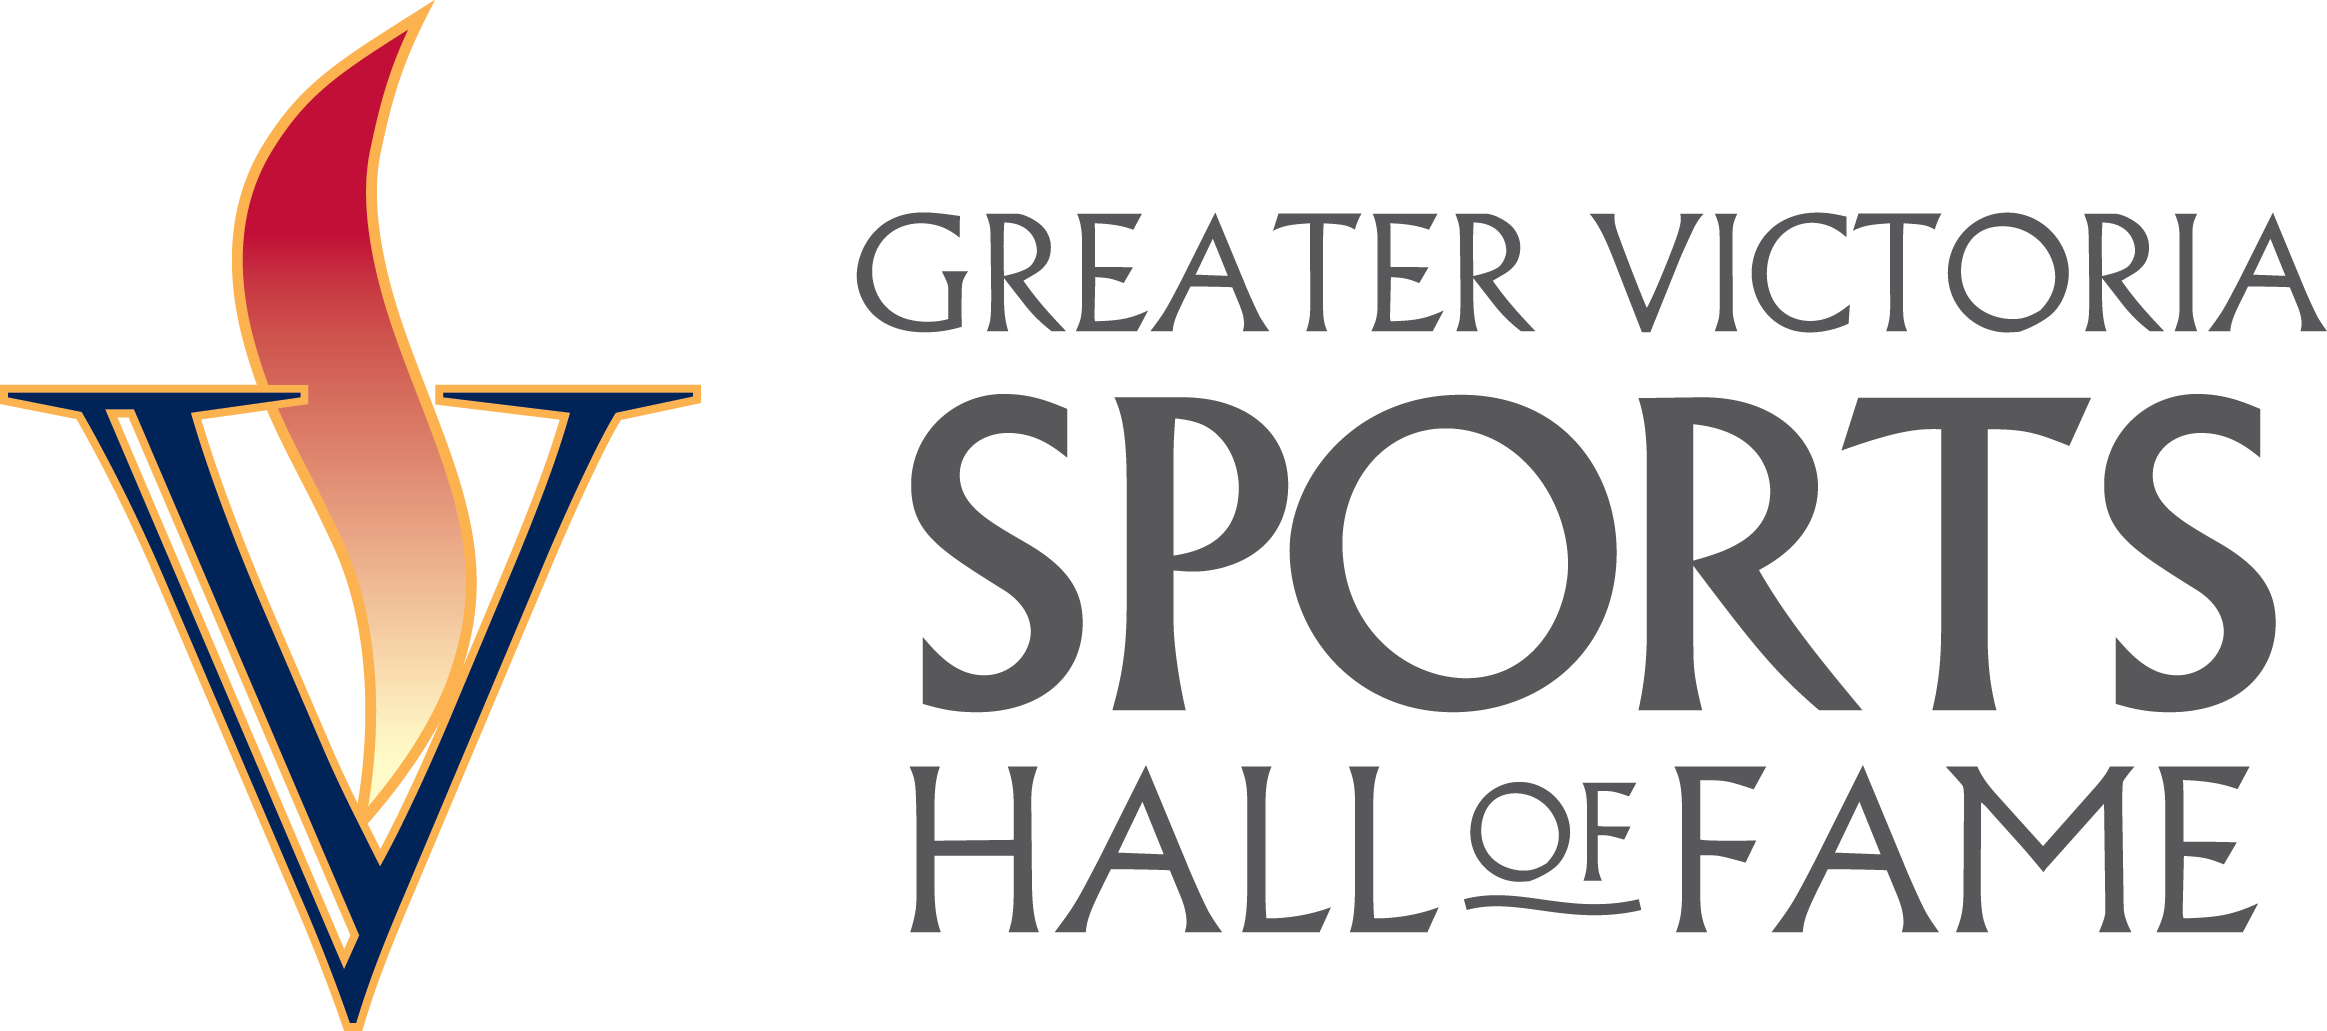 Greater Victoria Sports Hall of Fame logo